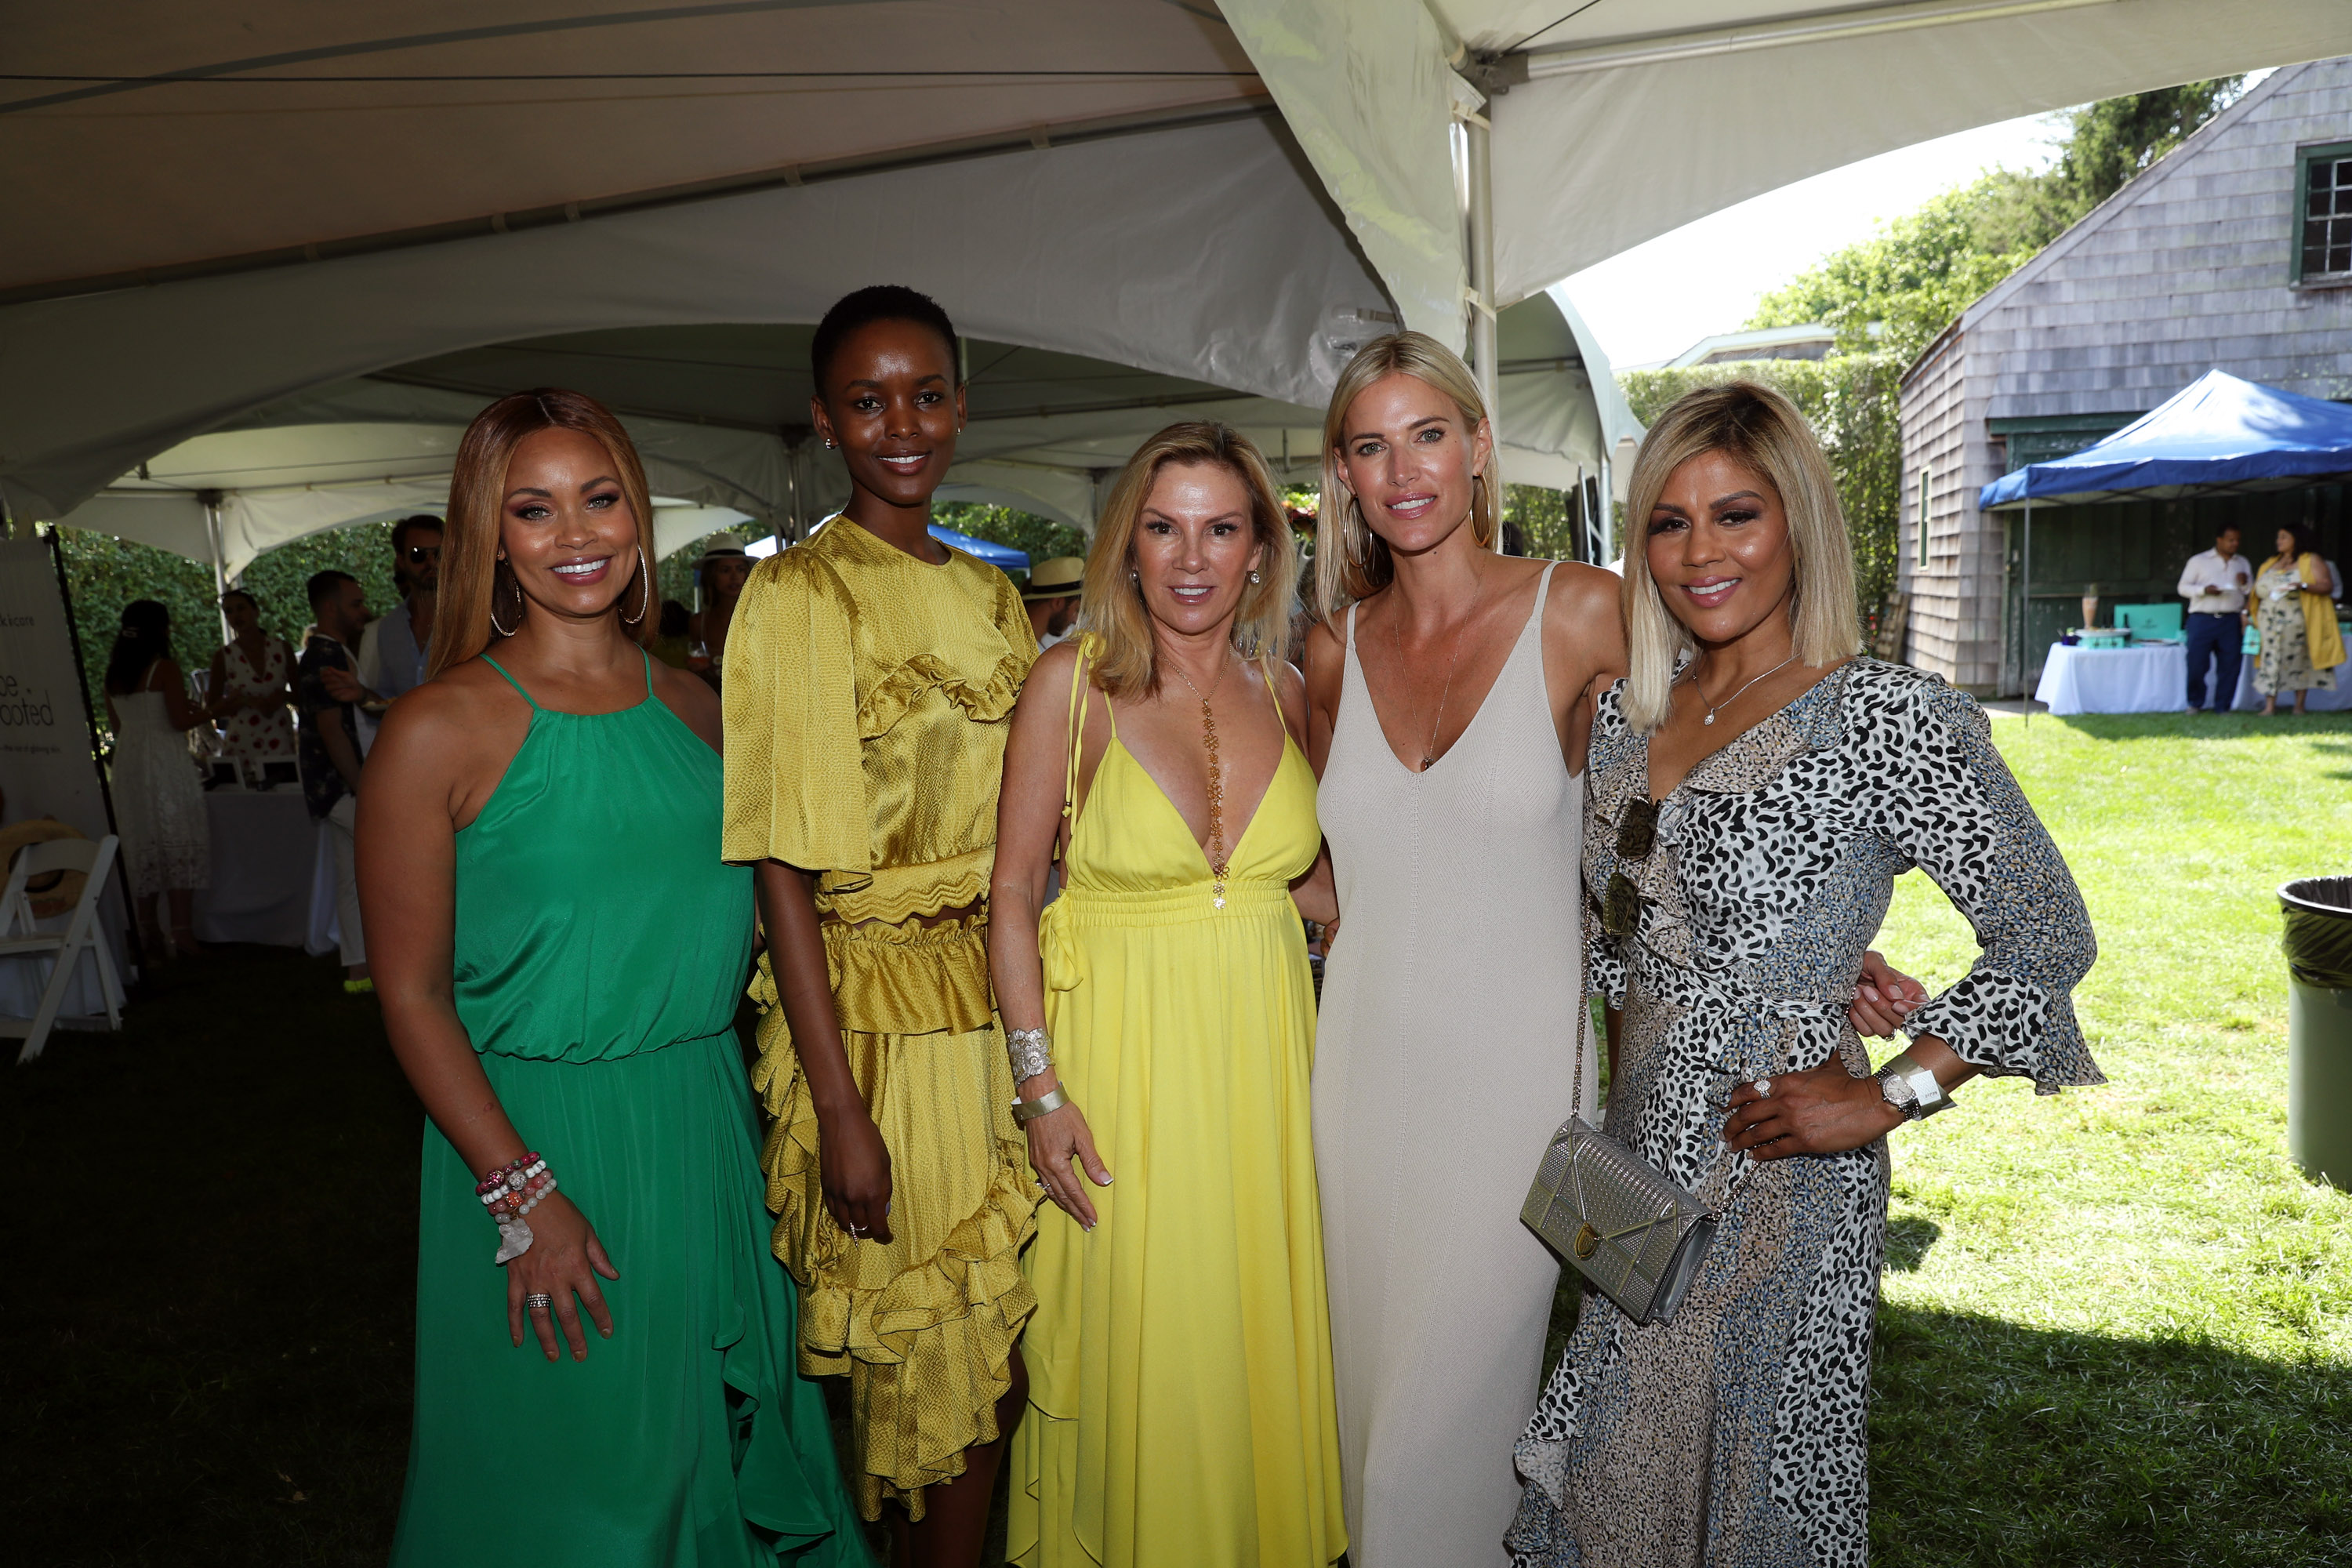 Ramona Singer, Kristen Taekman and more guests hanging out at a Hamptons party